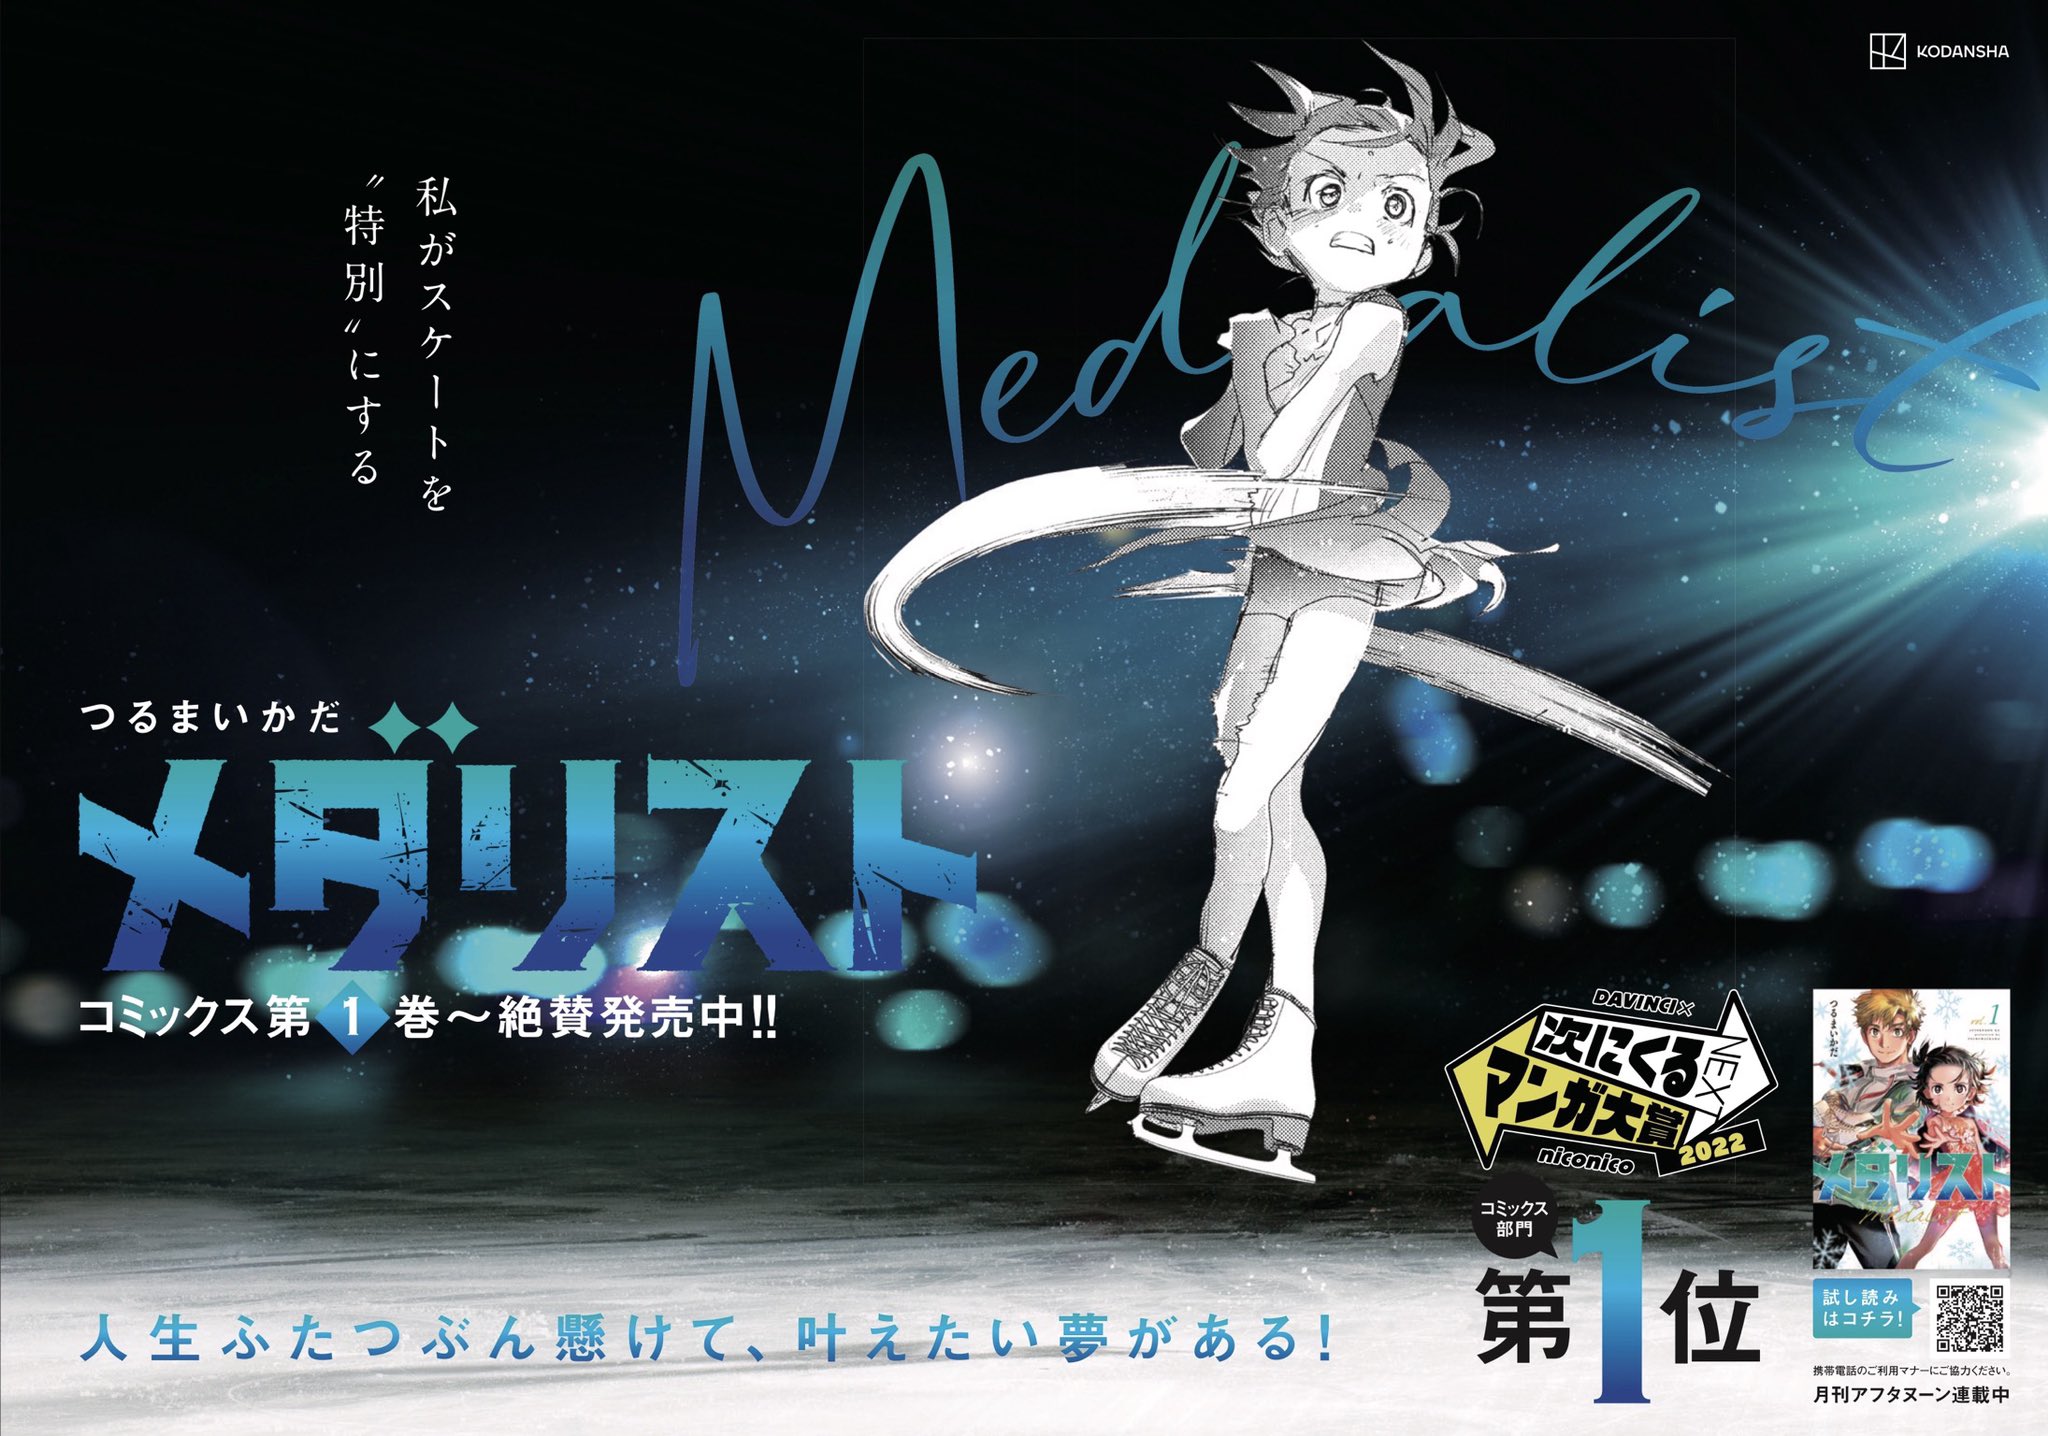 <div></noscript>Figure Skating Manga 'Medalist' Goes for Gold with TV Anime Announcement</div>